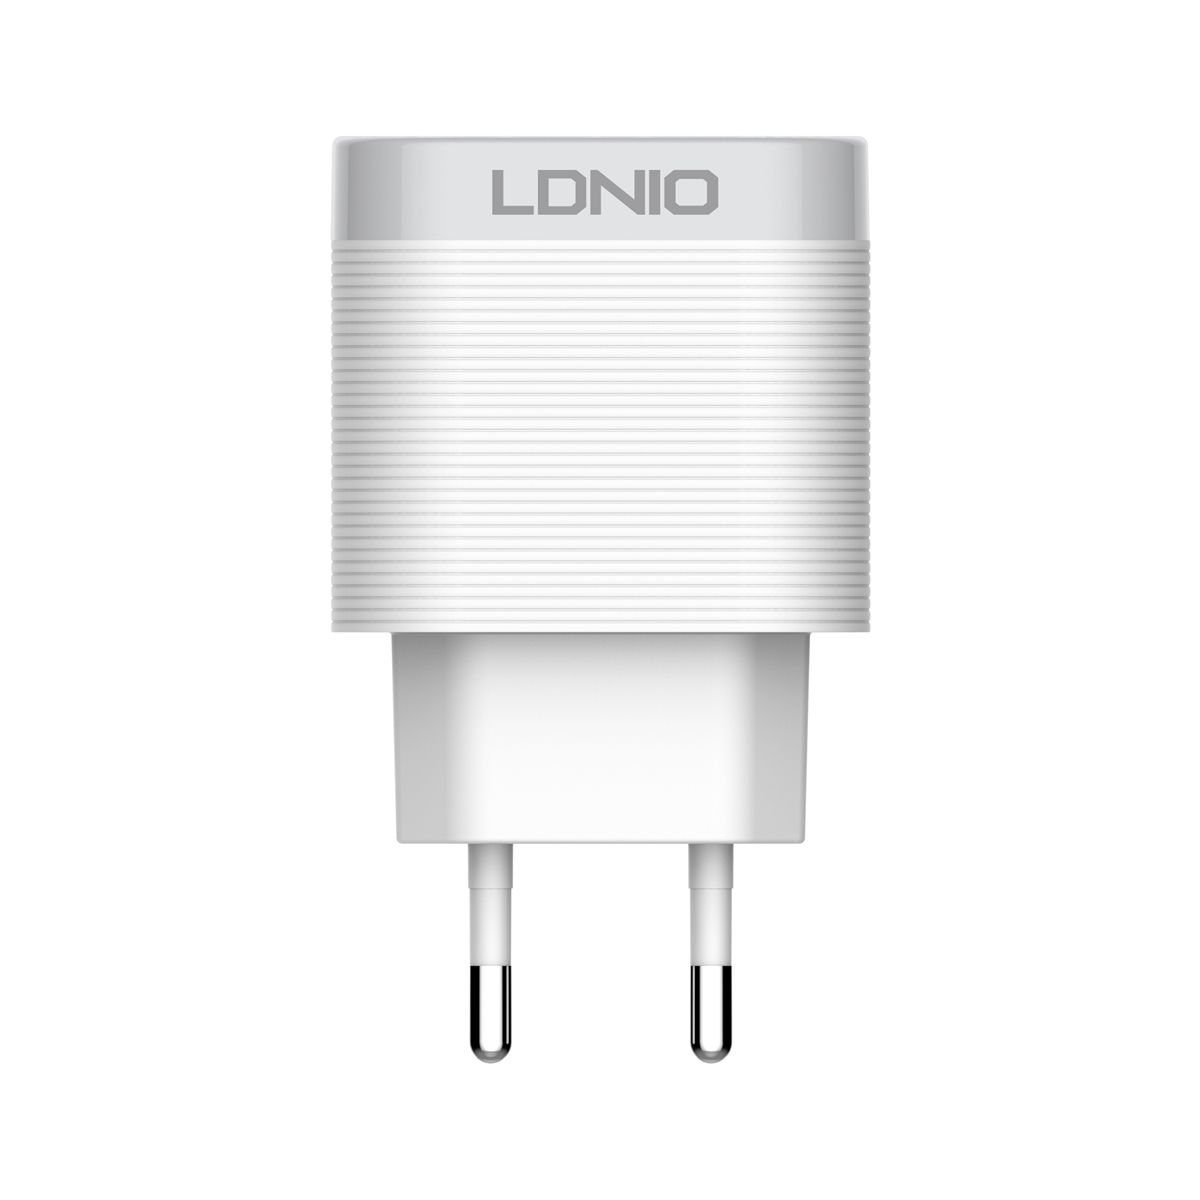 LDNIO-18W-QC30-USB-Charger-Travel-Wall-Charger-Adapter-With-USB-Type-C-Cable-Fast-Charging-For-iPhon-1737326